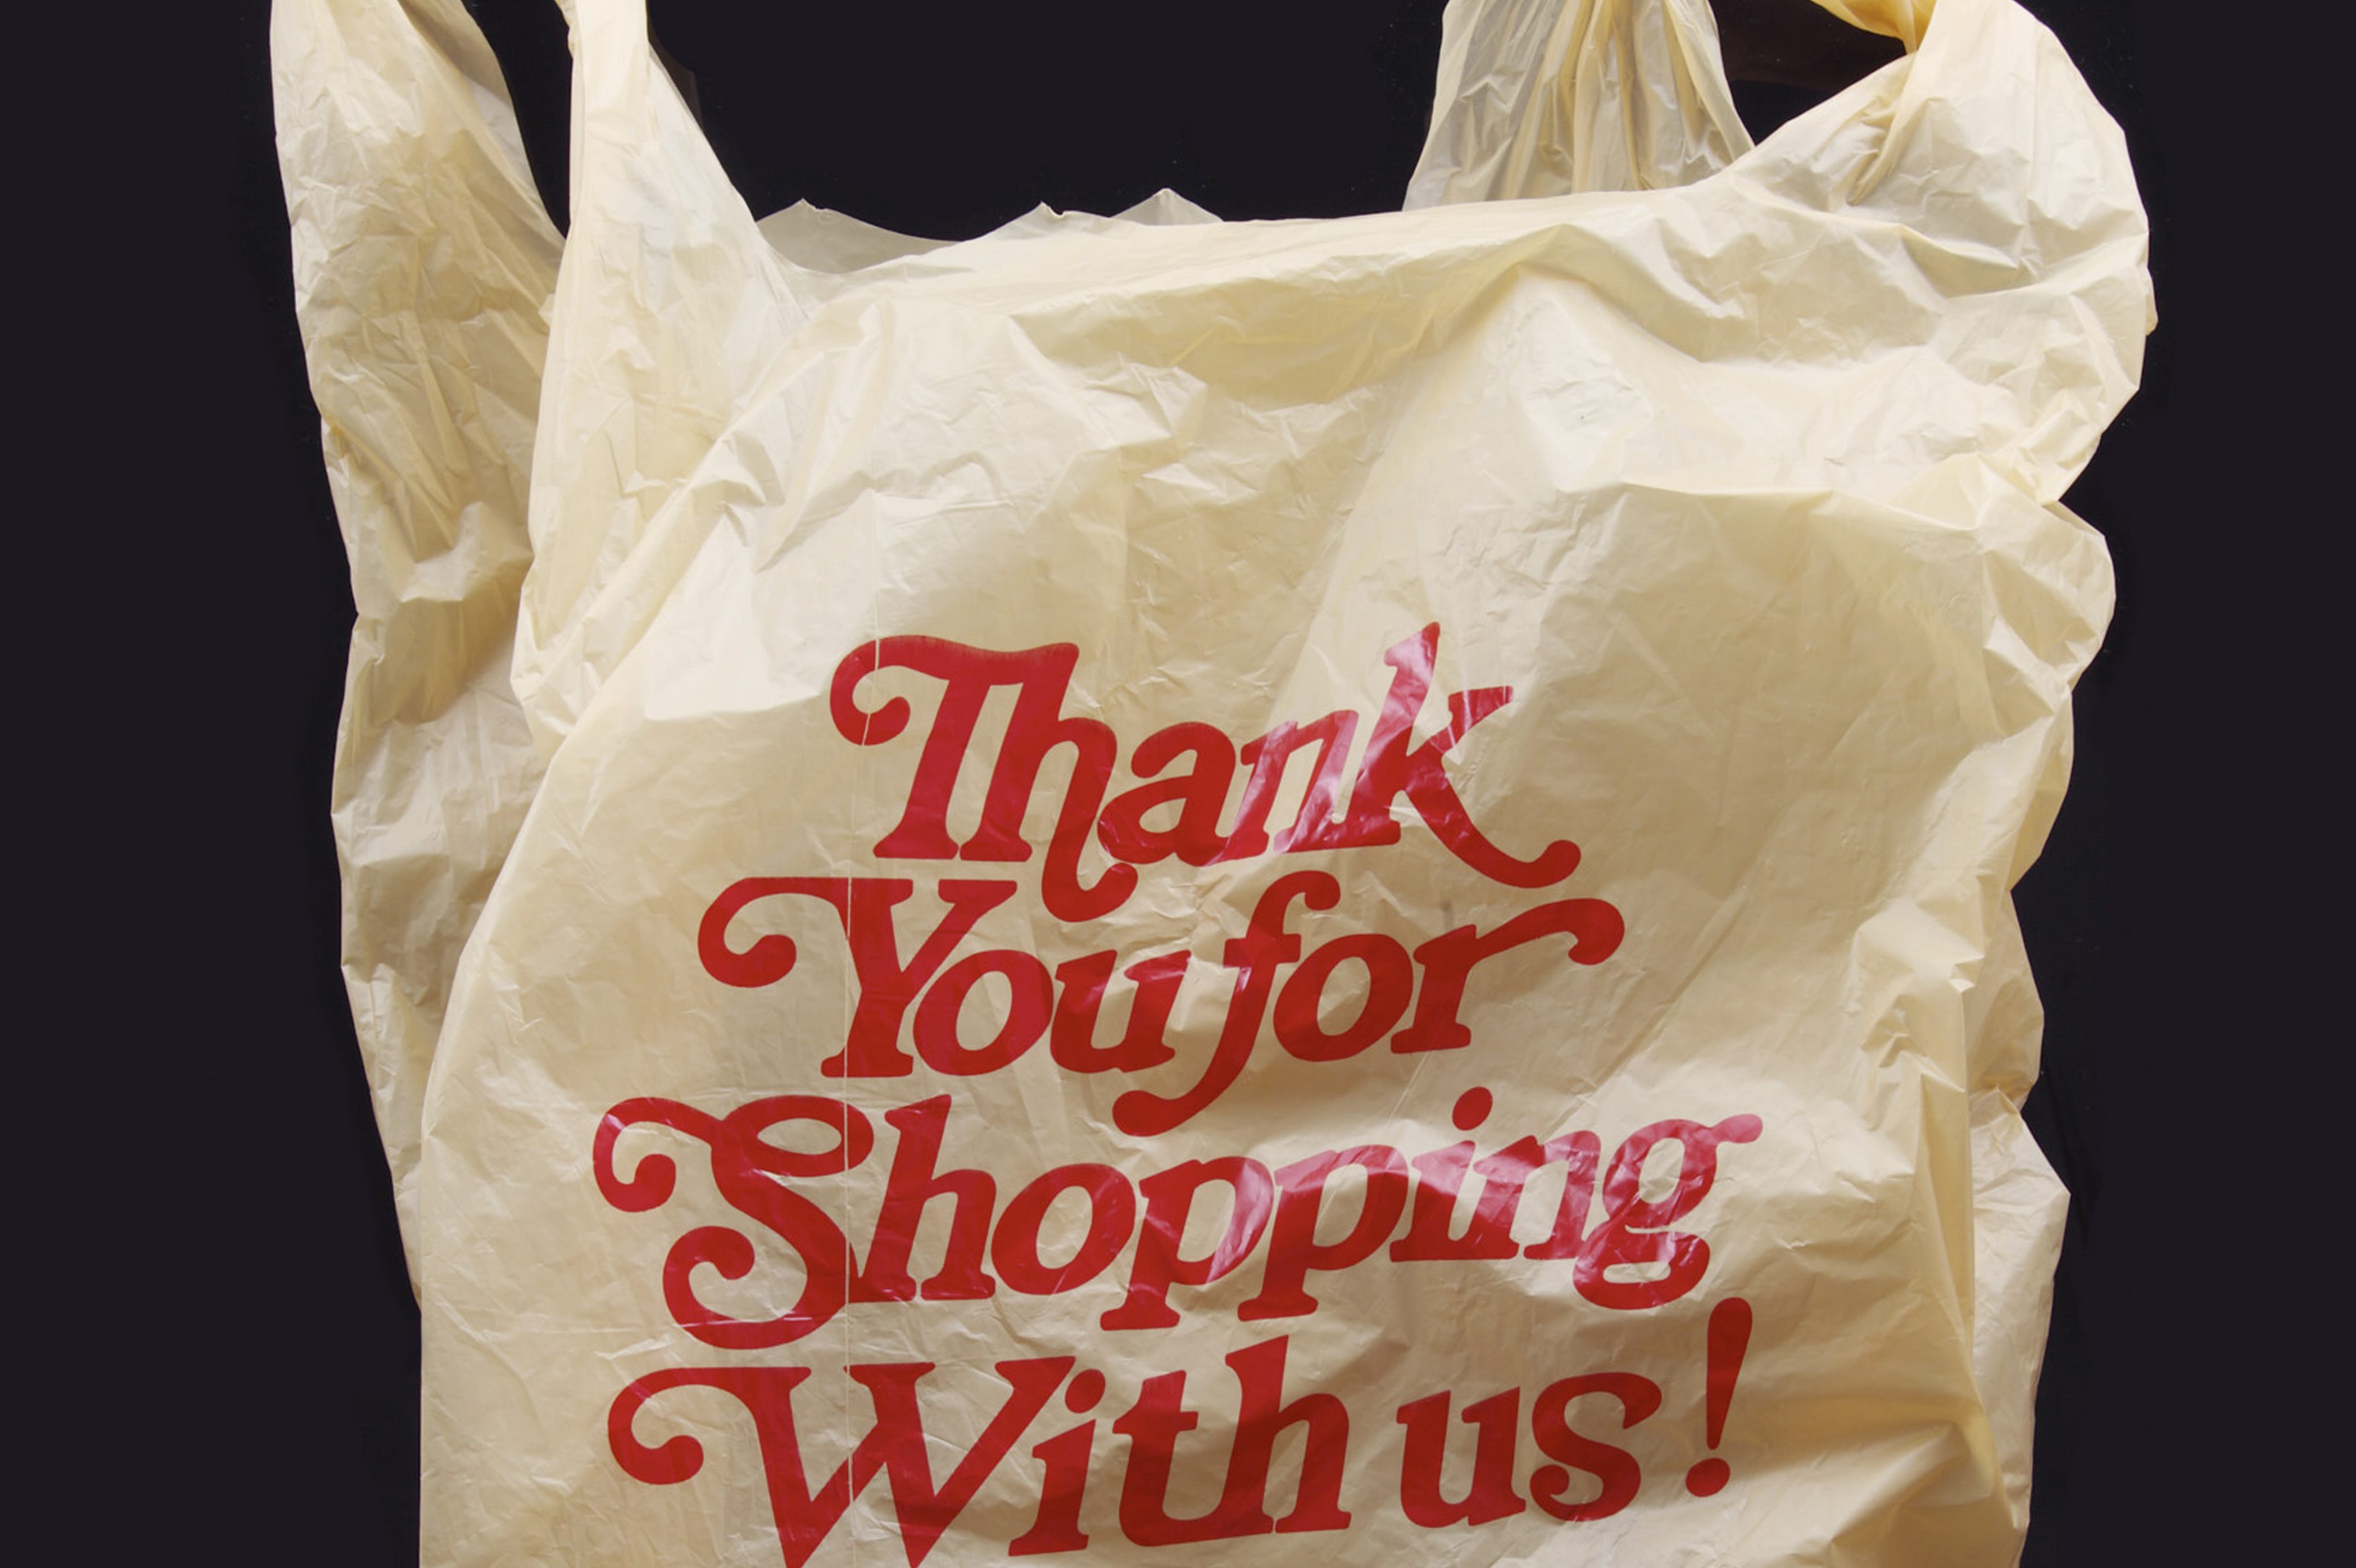 A plastic shopping bag floating in mid-air reads "thank you for shopping with us" to symbolize customer service, hospitality, and gratitude.